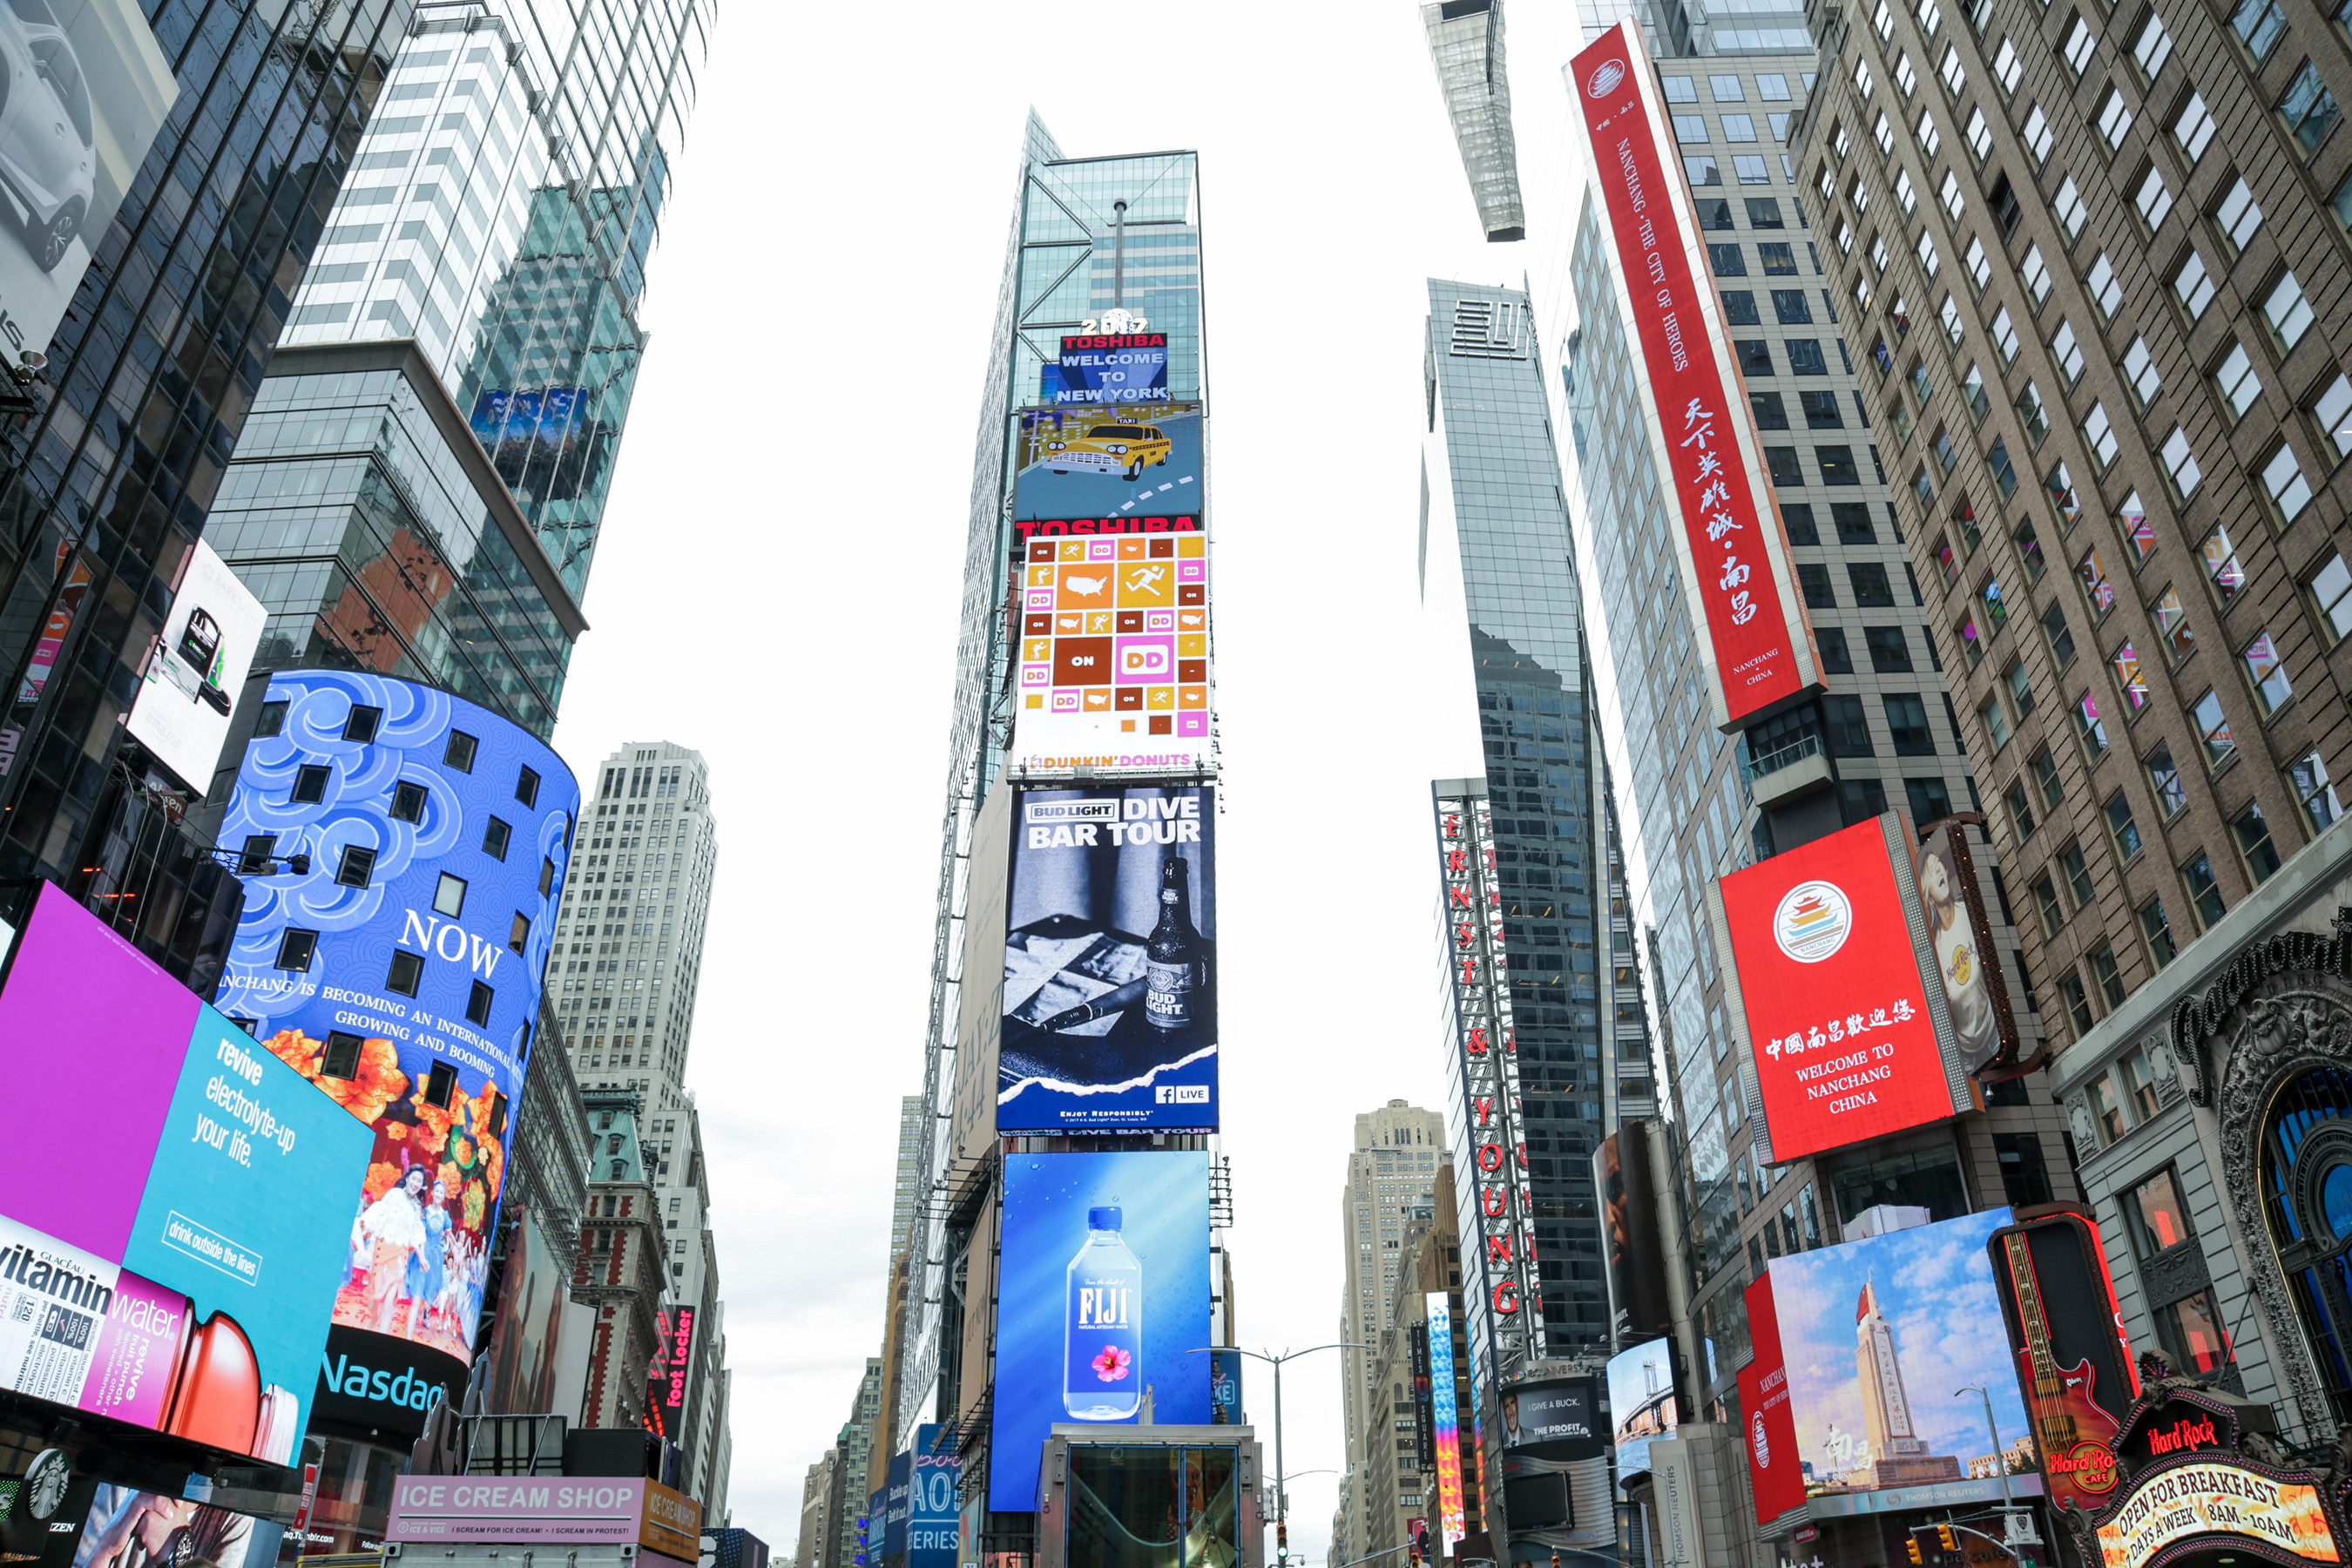 Nanchang China launched “City of Hero” Campaign on Times Square New York City.